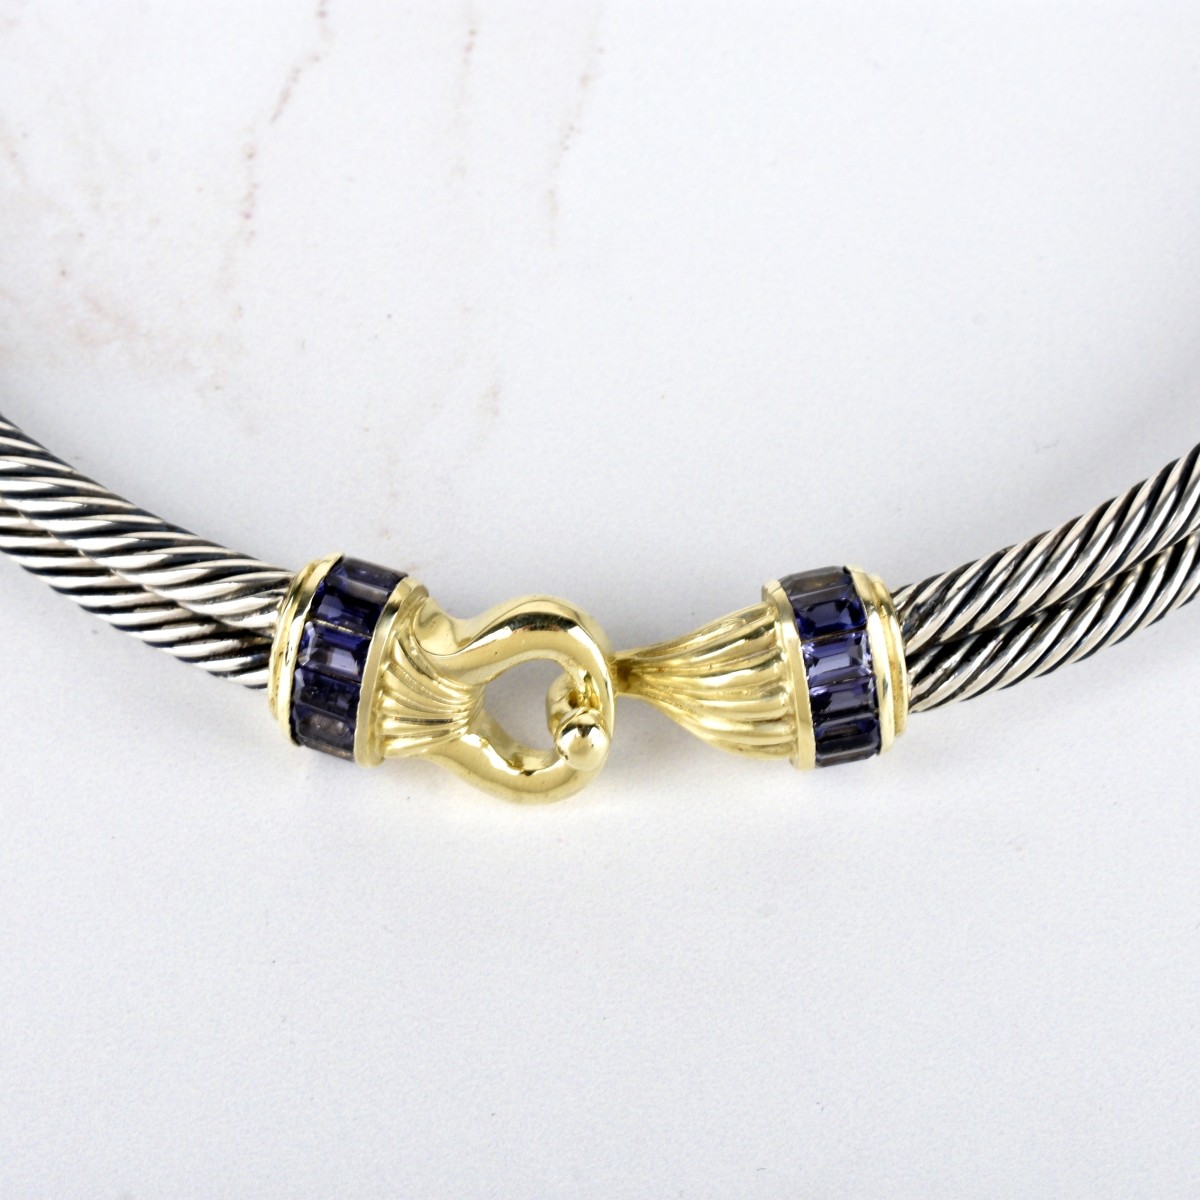 Gemstone, 14K and Silver Choker Necklace